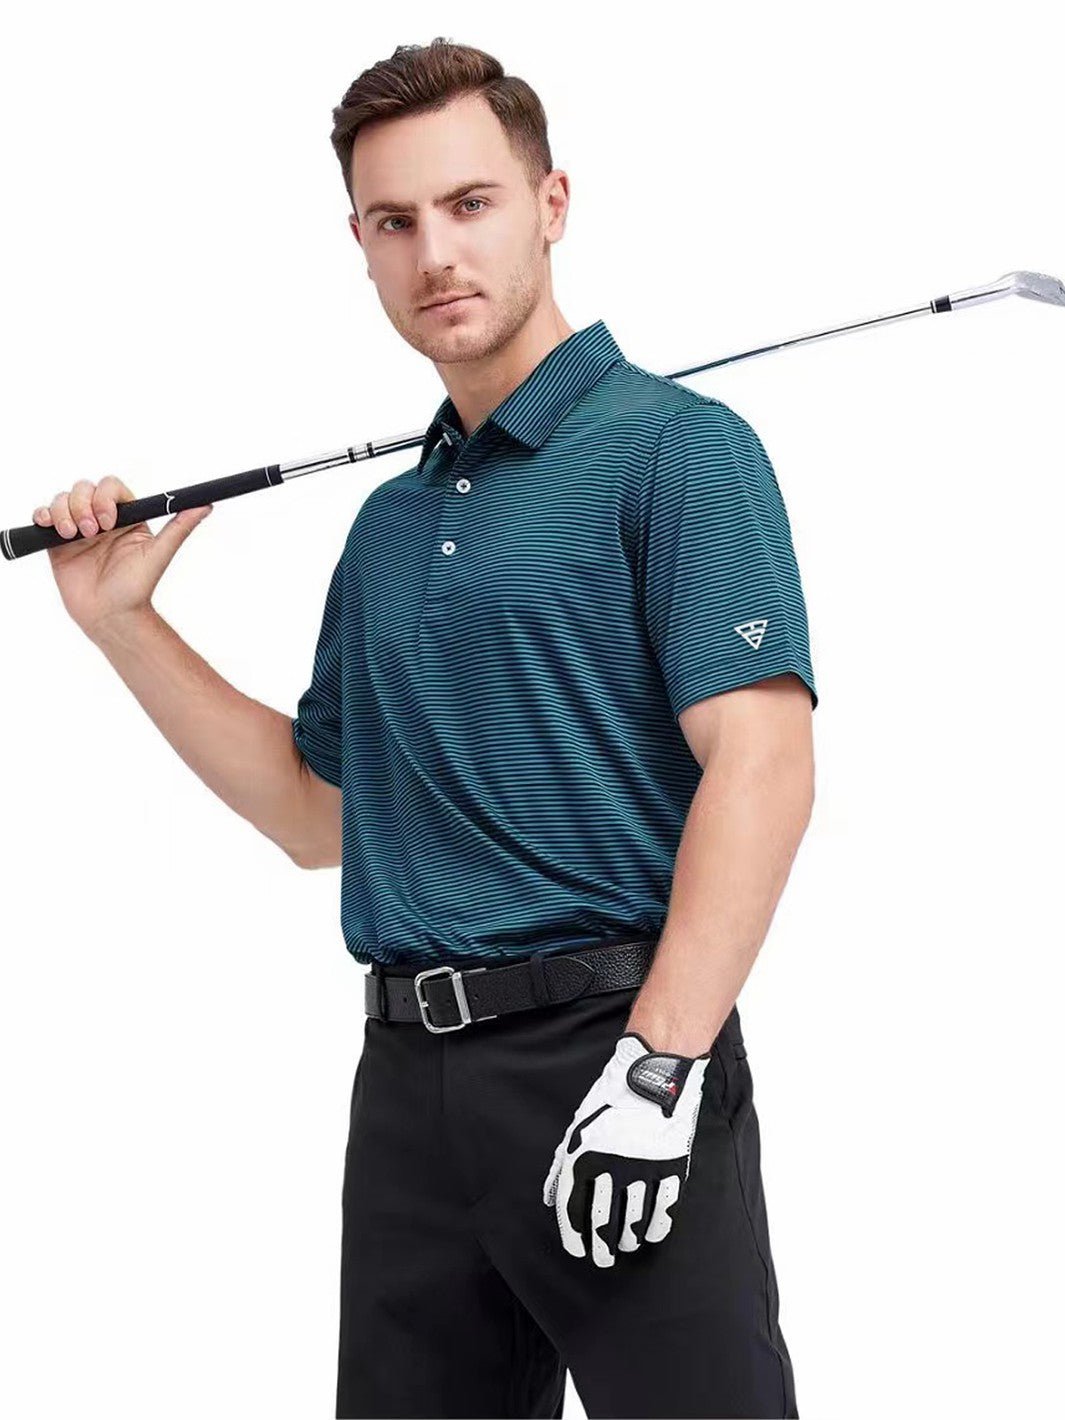 Men's Striped Golf Shirts Performance Moisture Wicking Dry Fit Golf Shirts for Men